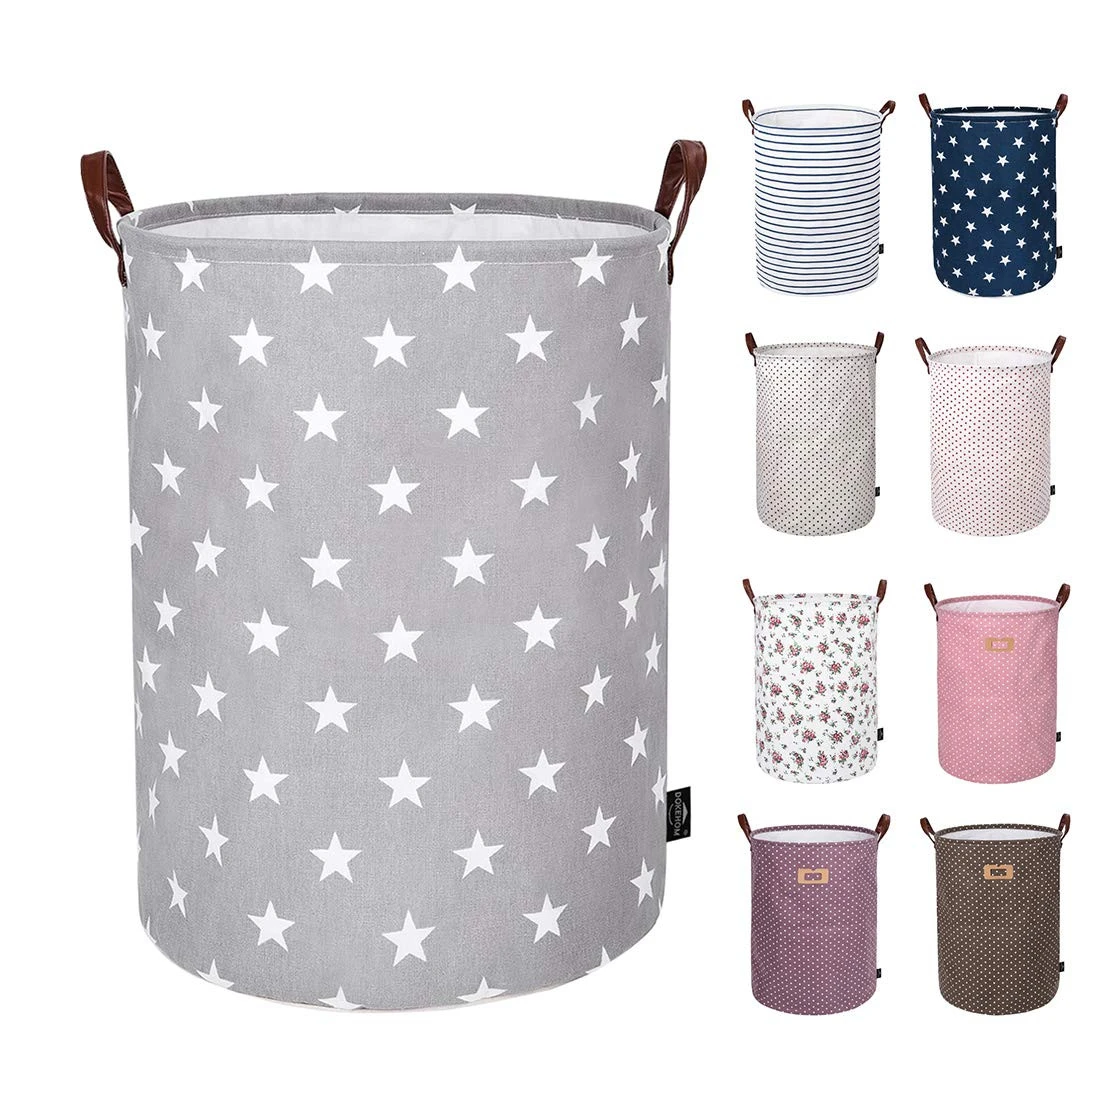 Folding Laundry Basket For Dirty Clothes Kids Toys Basket Storage Bag Collapsible Container Laundry Basket